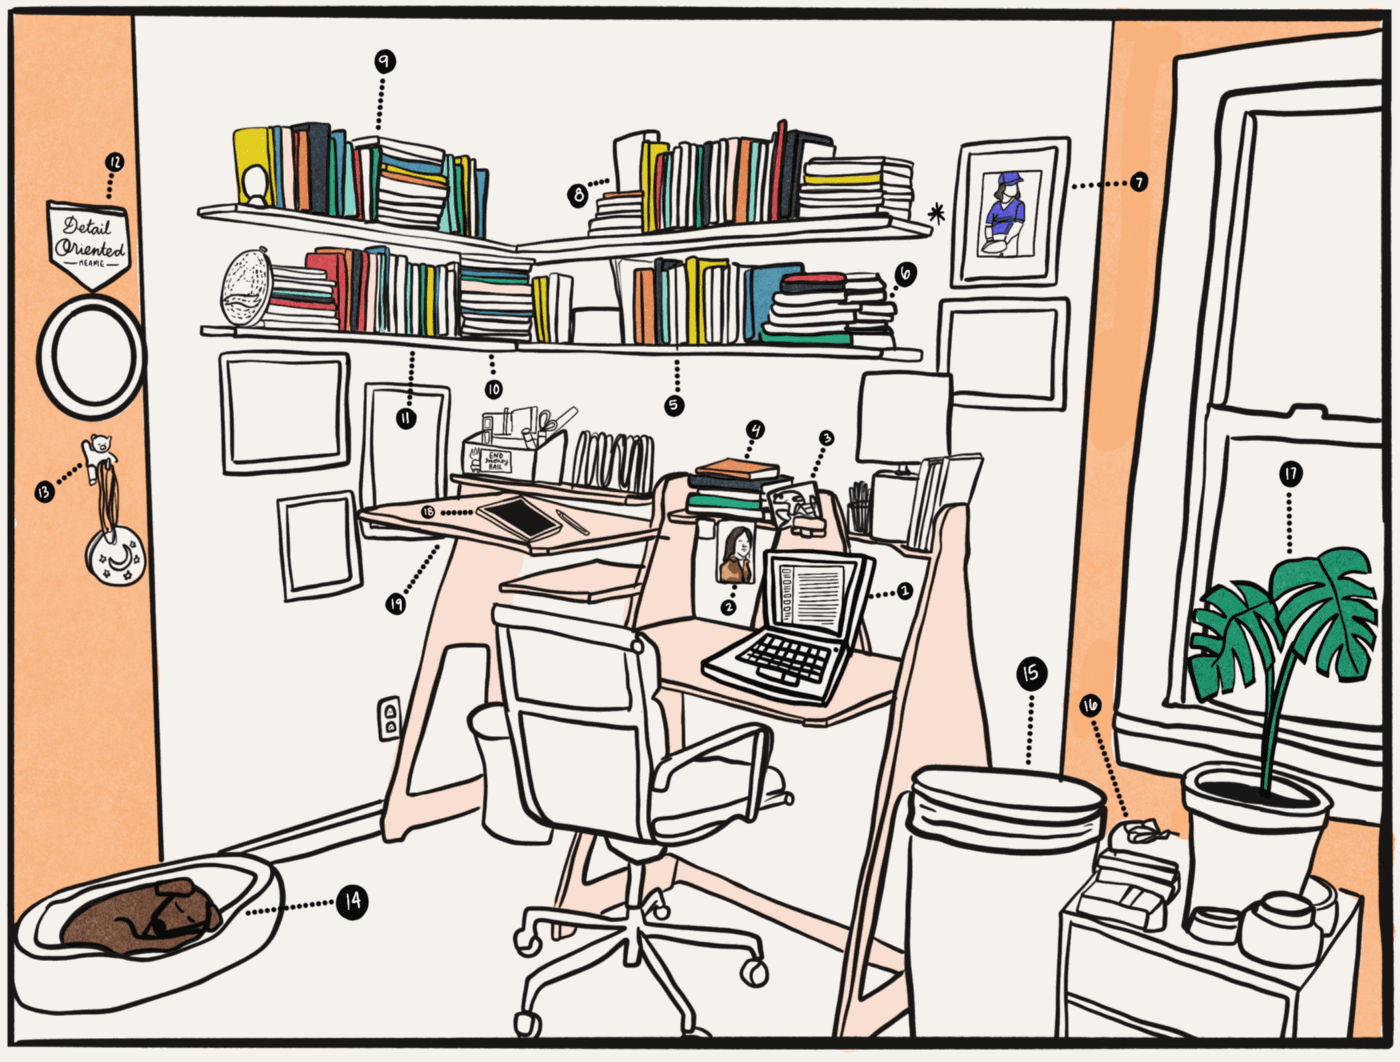 Two images of the same workspace. In one frame the workspace is clean and organized In the other frame the workspace is disorganized and messy.